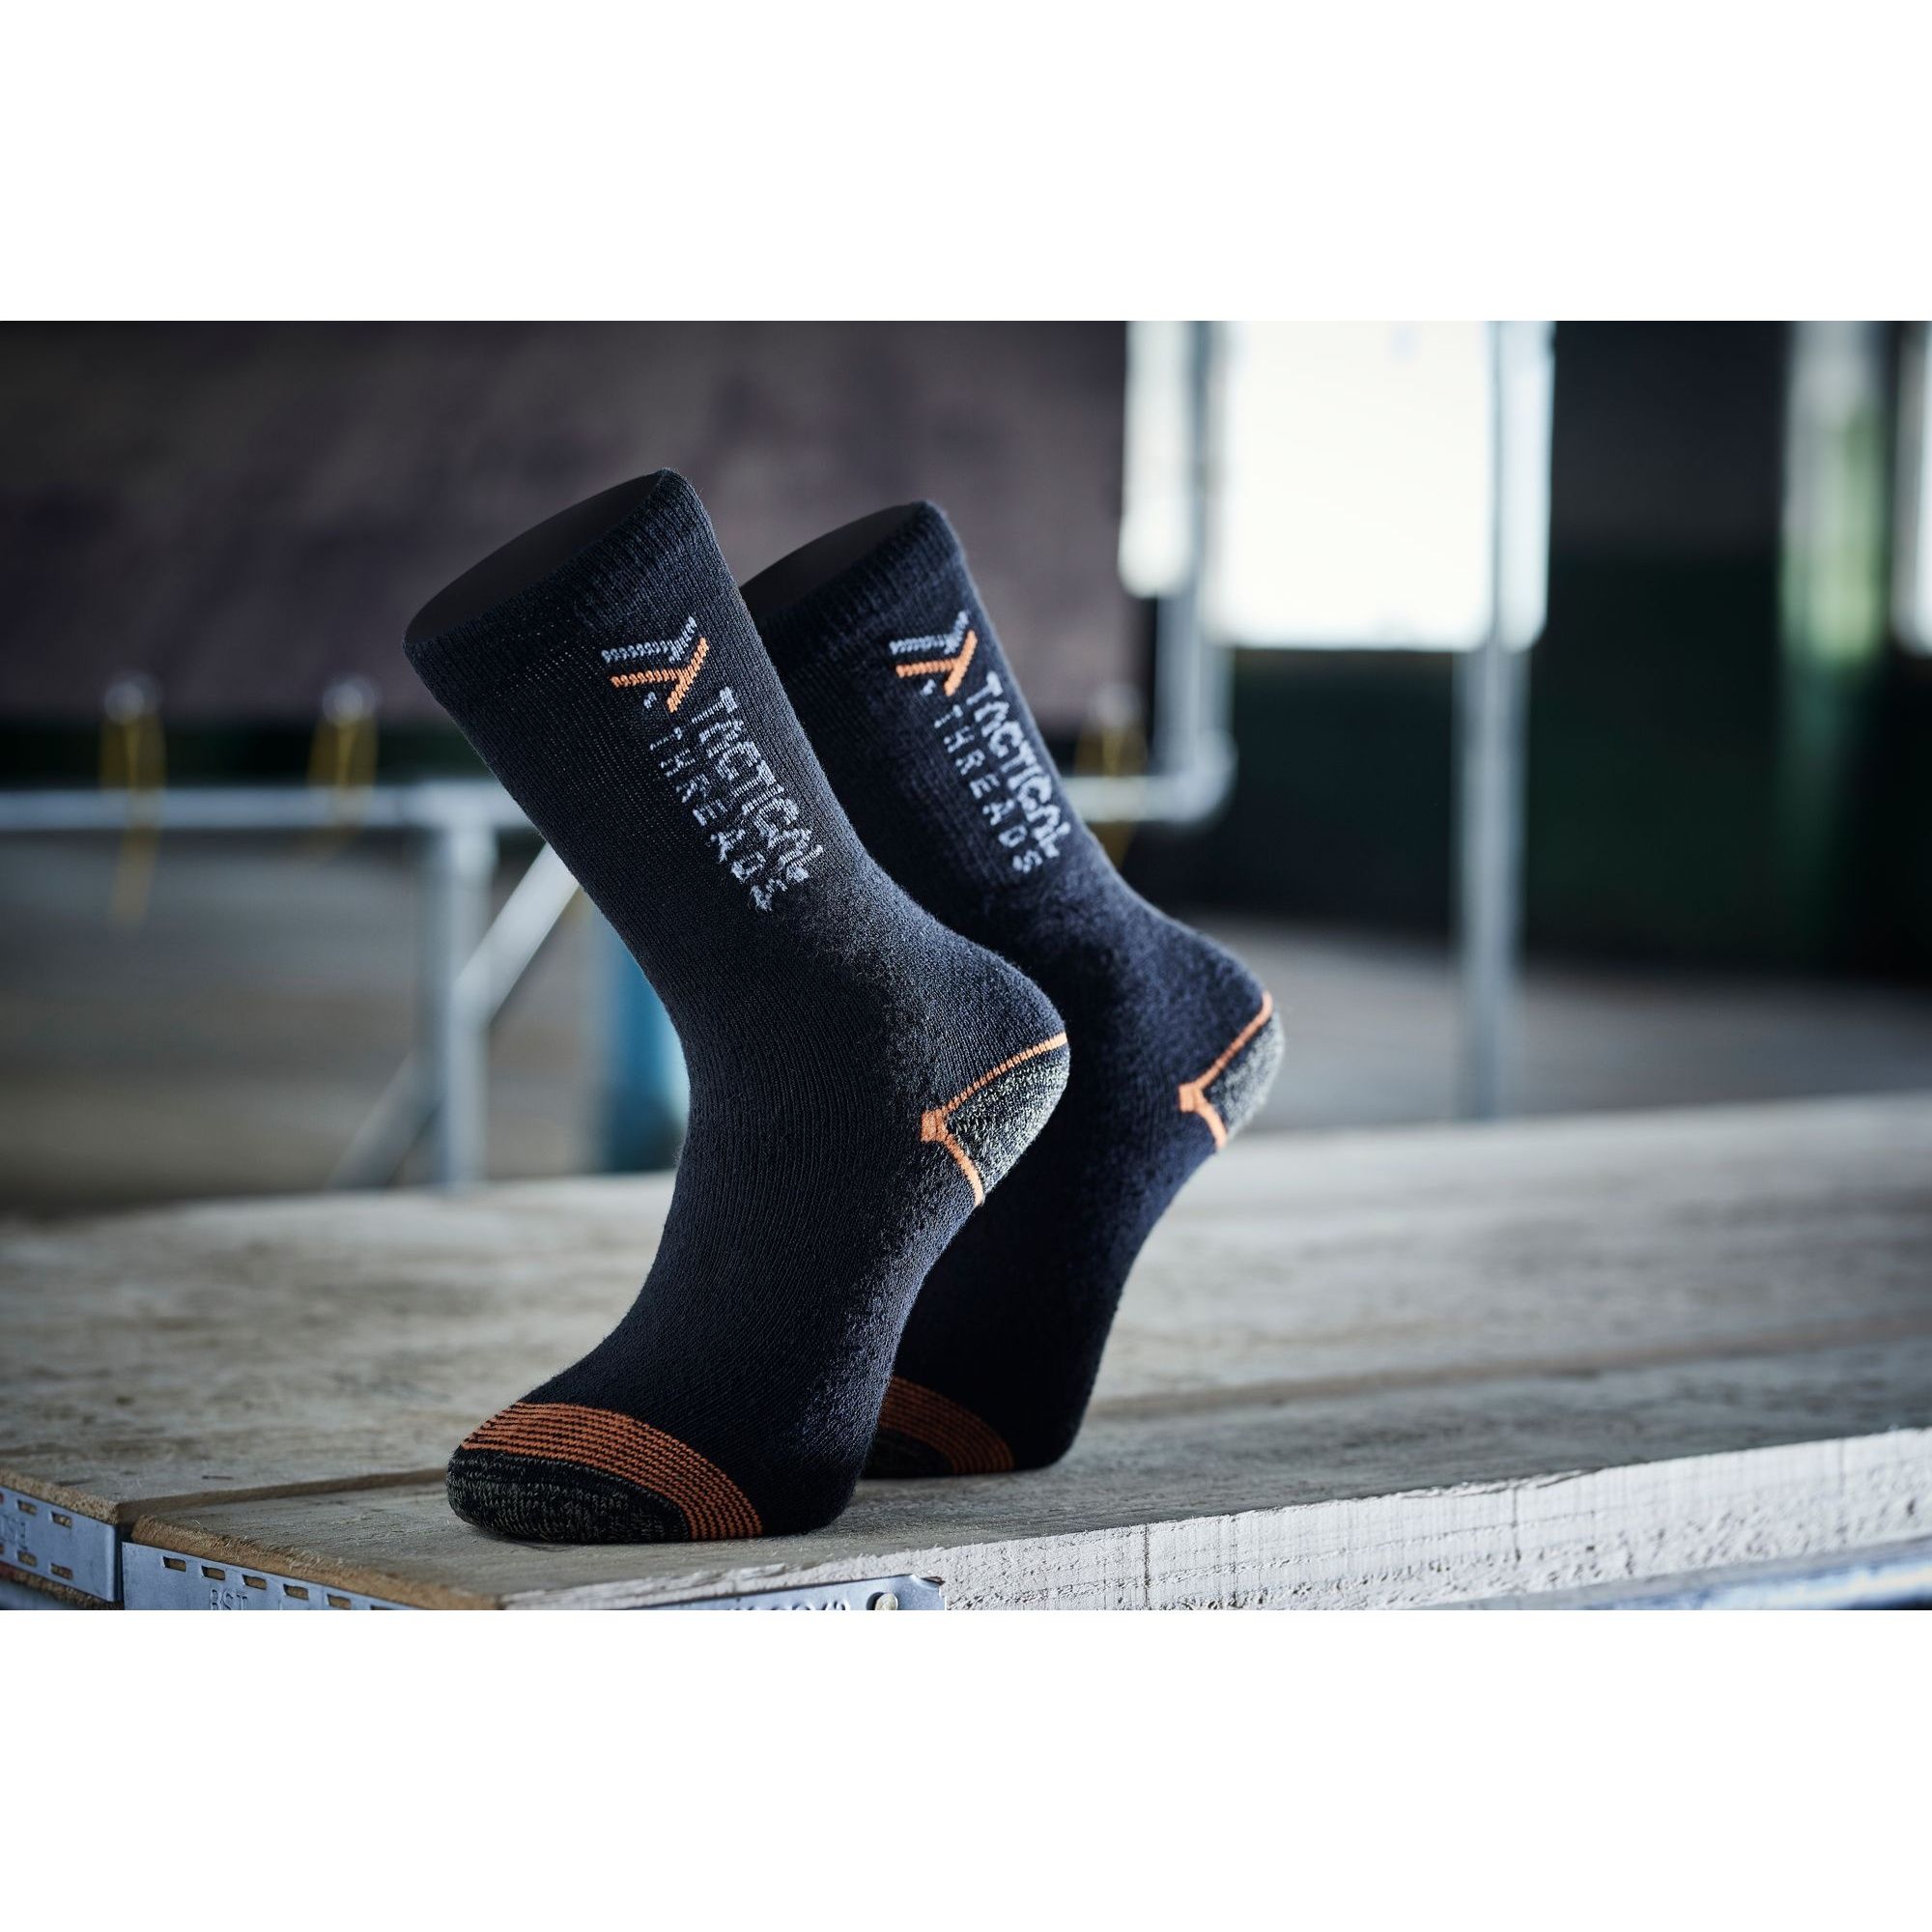 68% Cotton, 16% Acrylic, 14% Polyester, 2% Elastane. 3 pair pack of socks. Hardwearing loopstitch design. Ribbed ankle cuff for extra support. Cushioned loopstitch heel and toe. Flat toe seam for comfort.